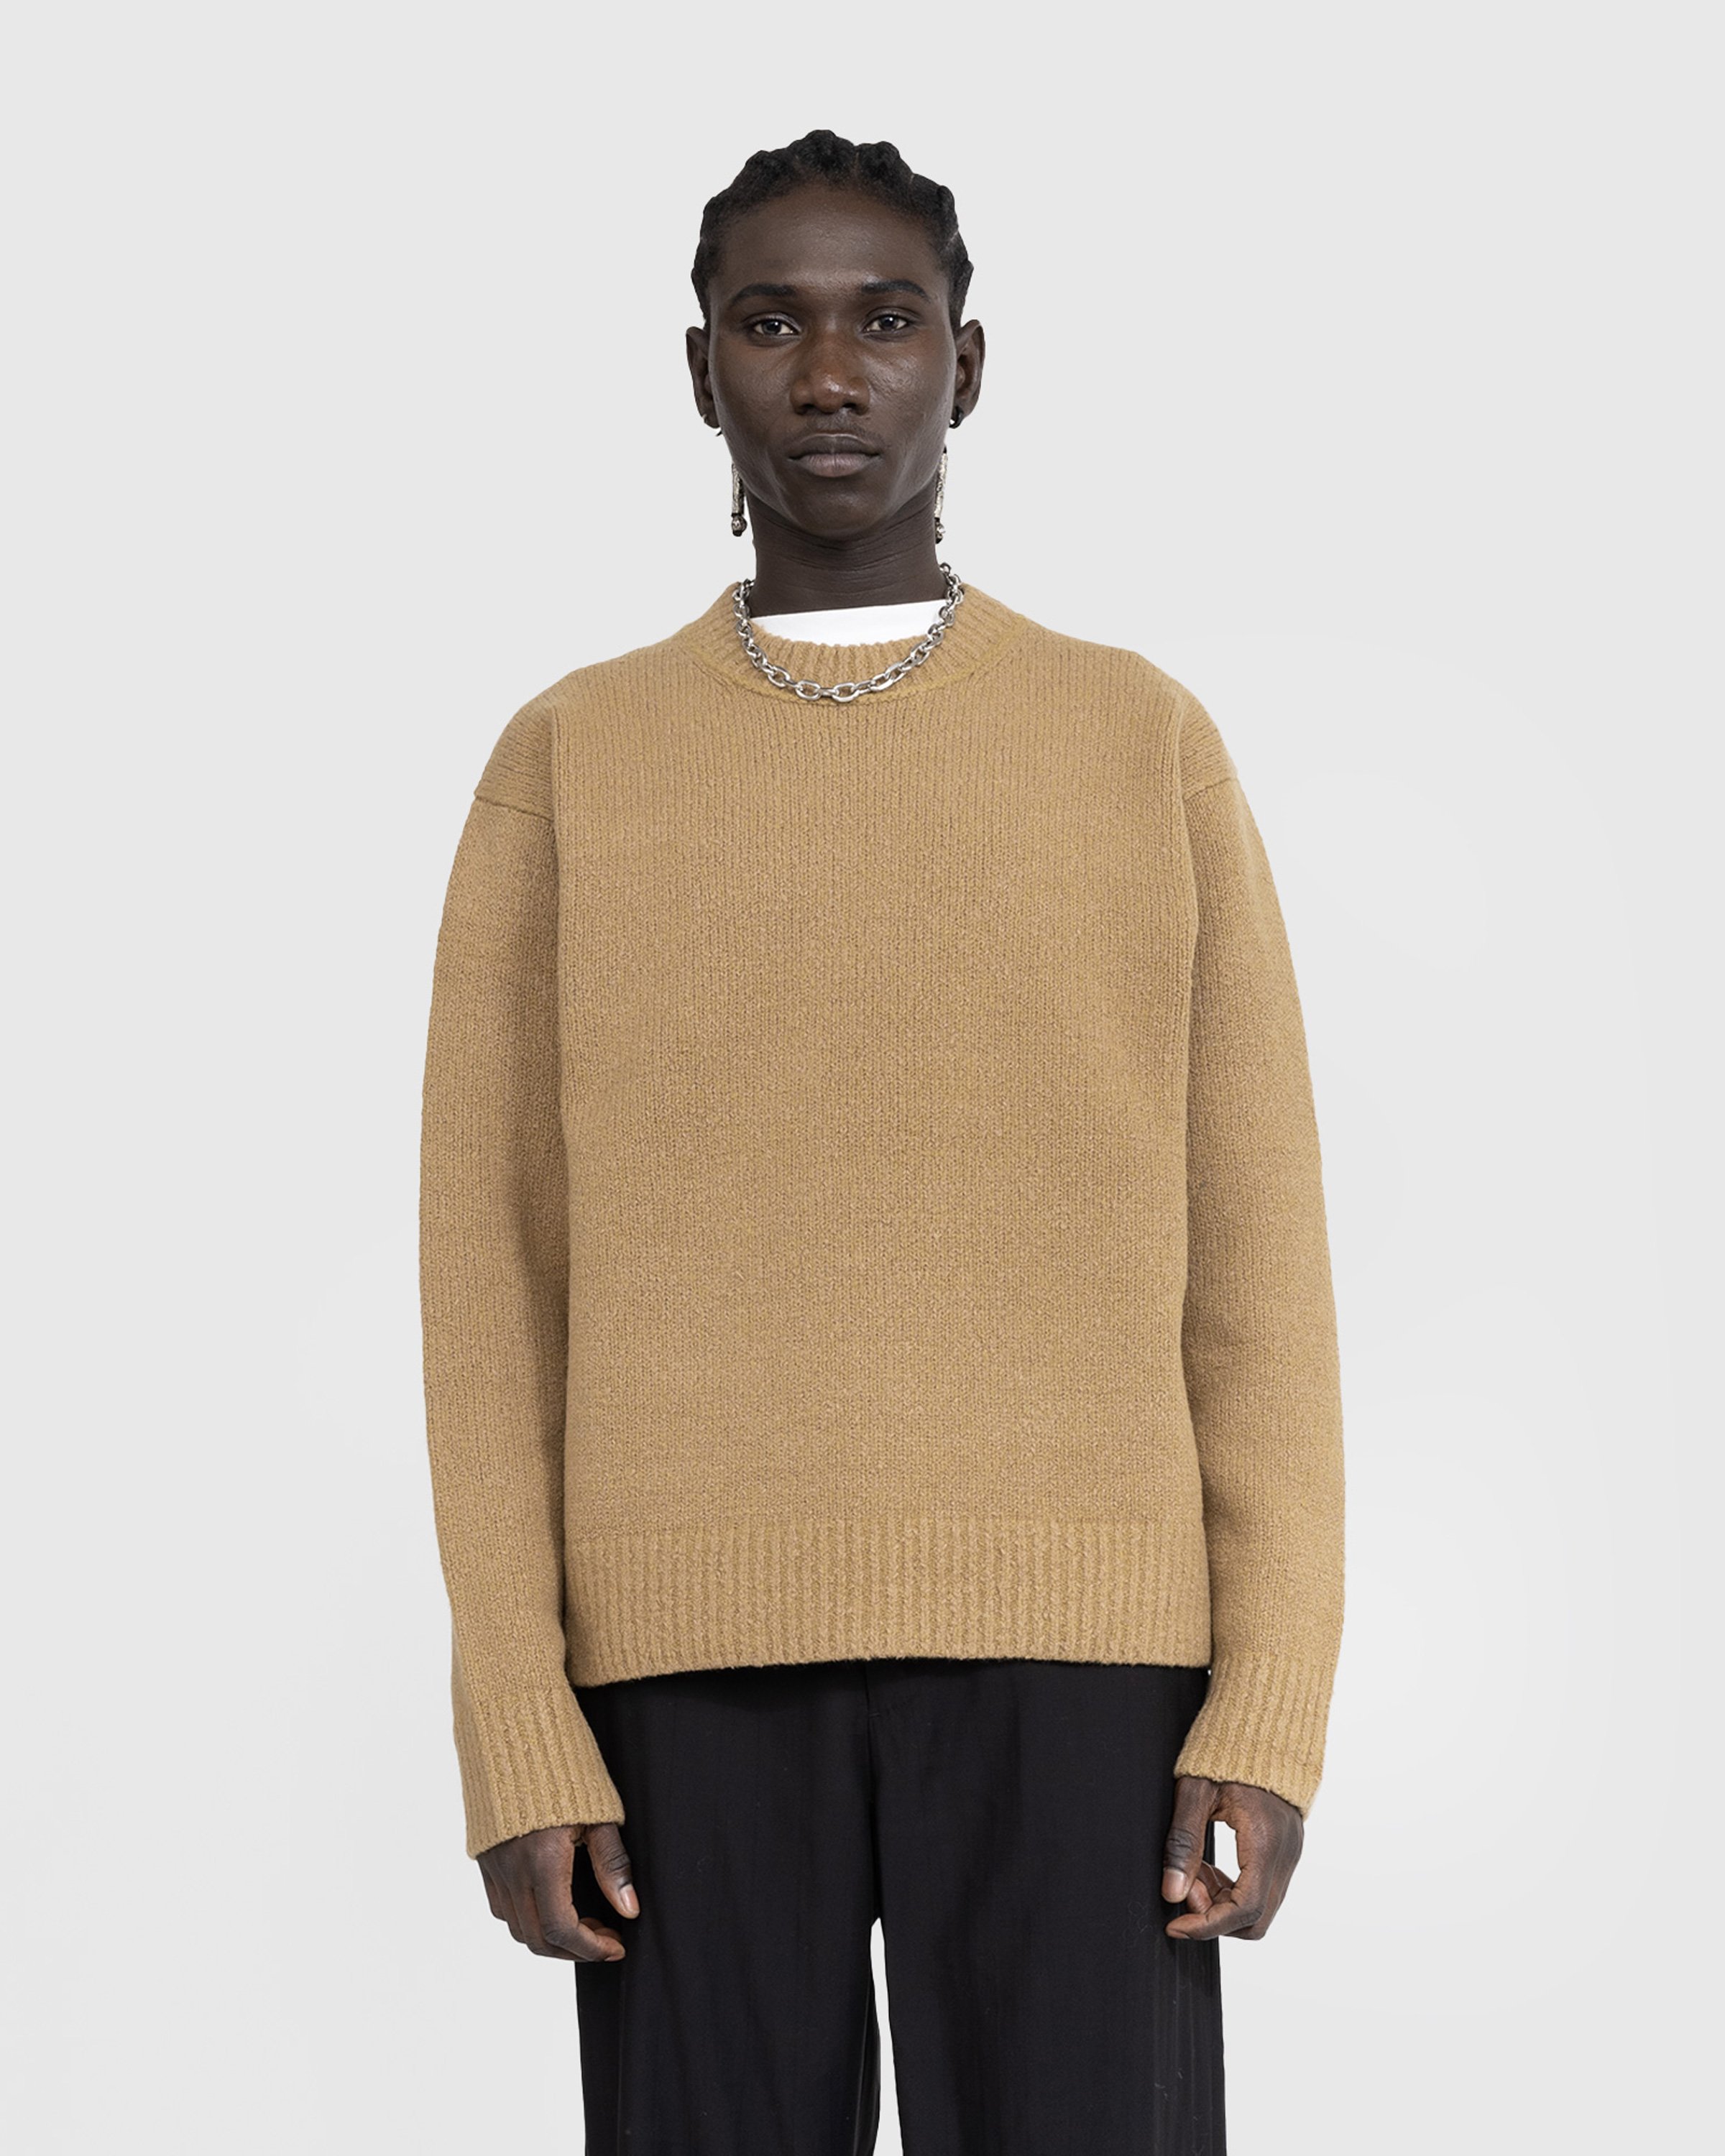 Acne Studios - FN-MN-KNIT000441 - Clothing - Brown - Image 2